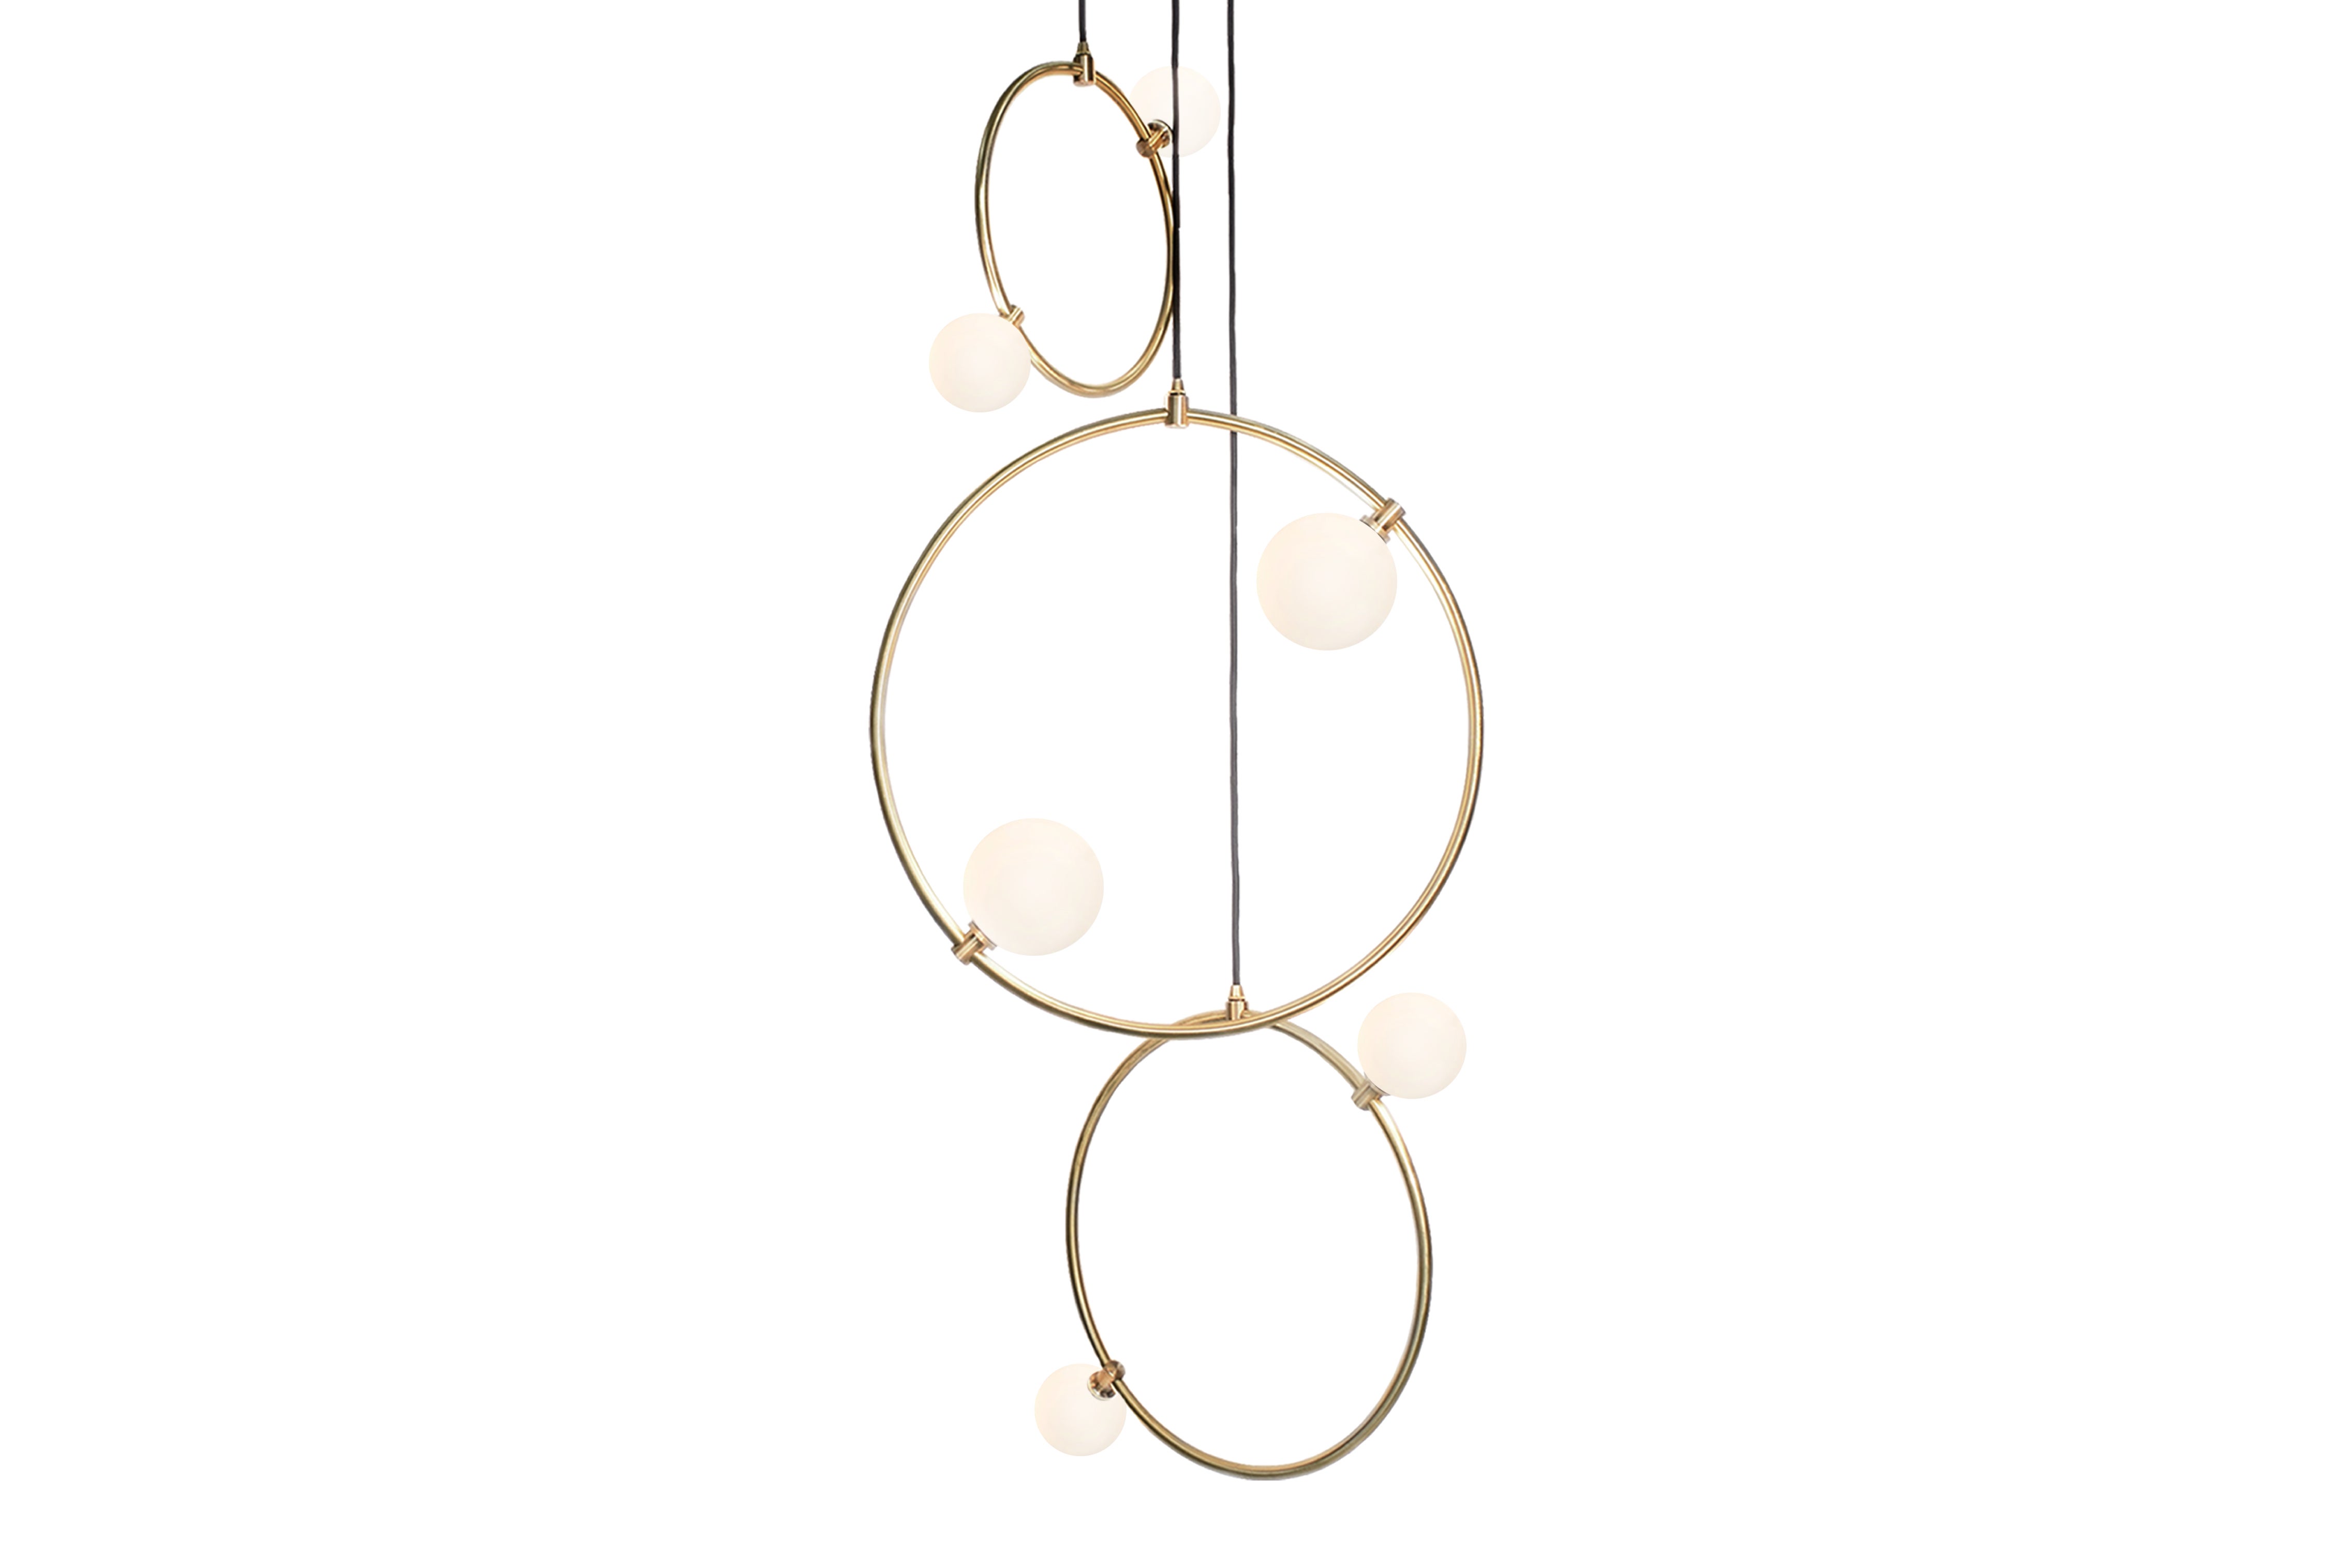 'Drops 3 Piece' by Marc Wood. Handmade Brass Ring Lamps, Opal Glass Shades For Sale